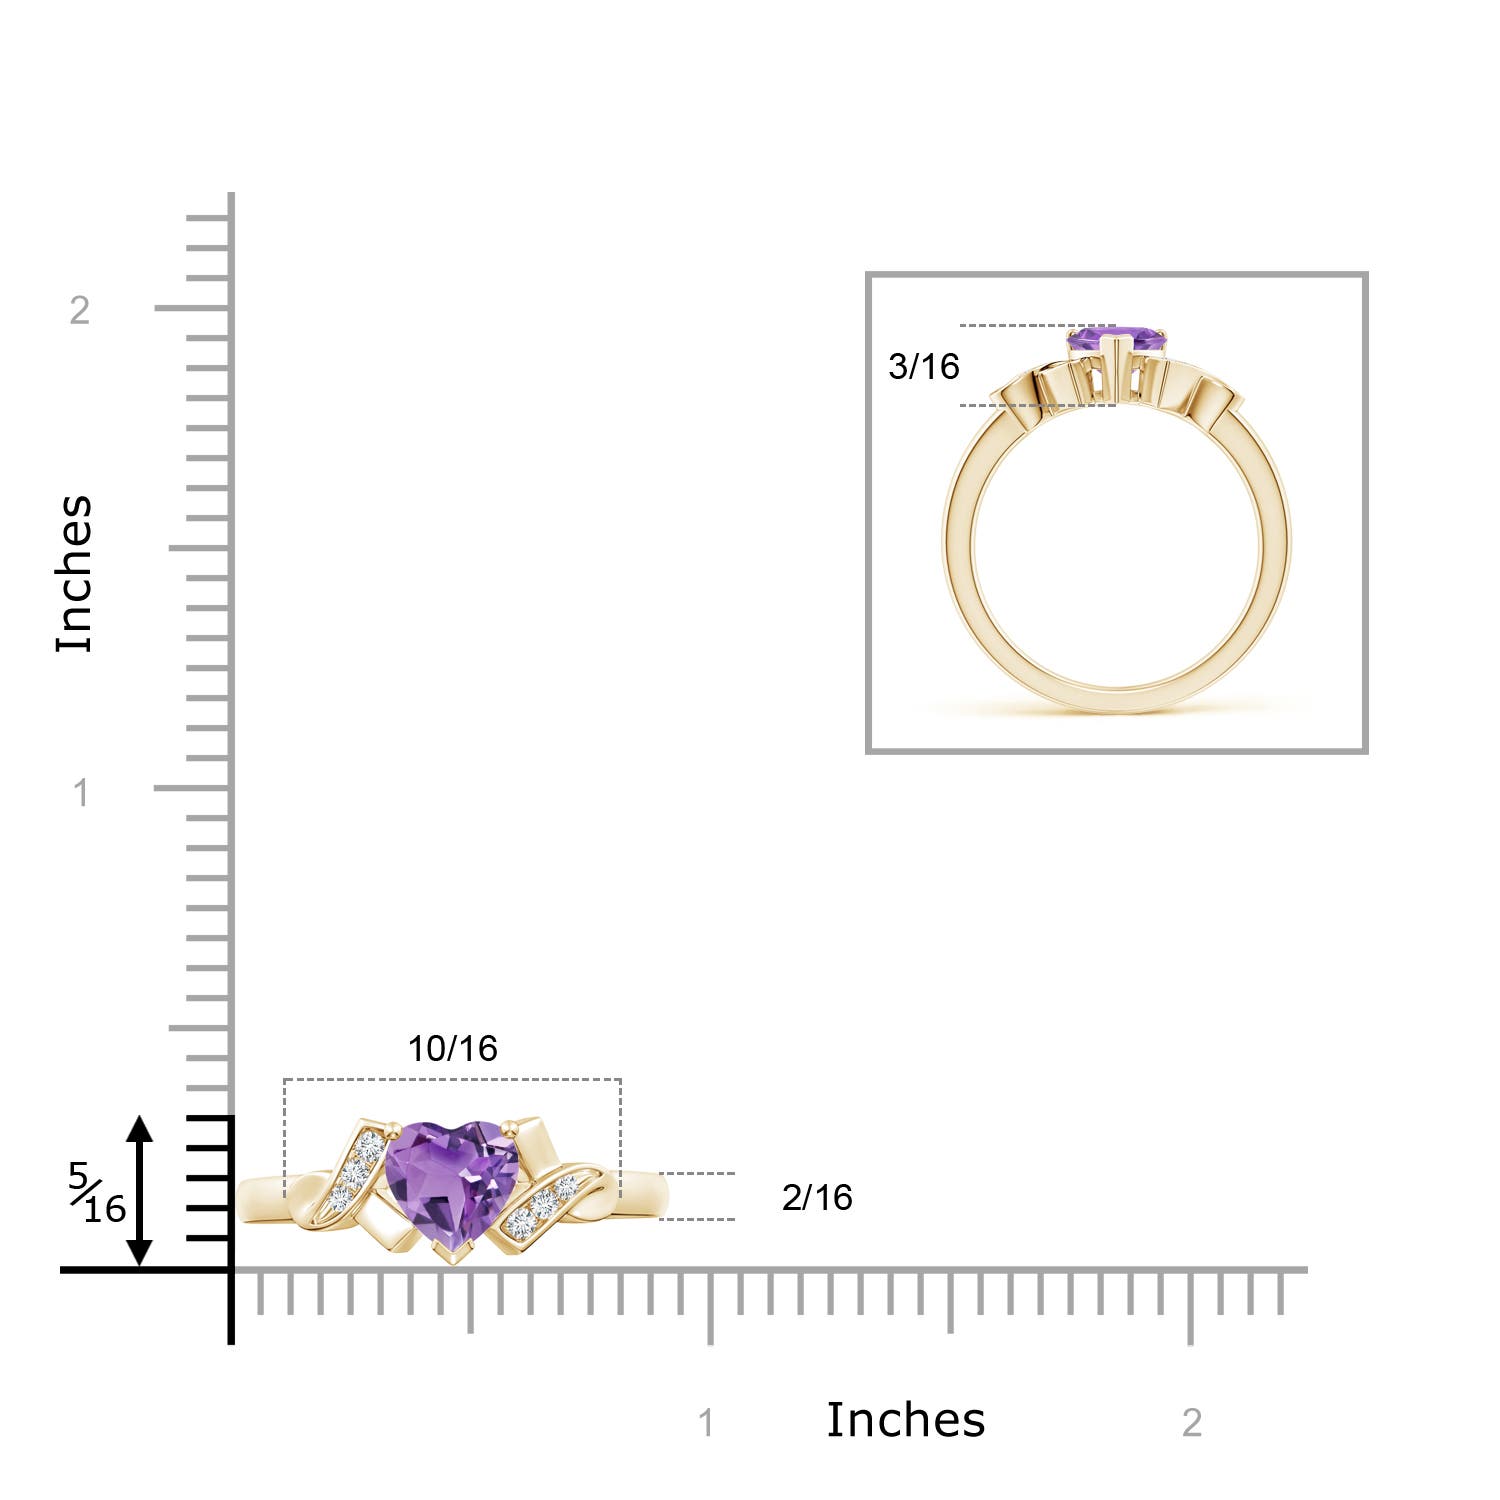 A - Amethyst / 0.76 CT / 14 KT Yellow Gold